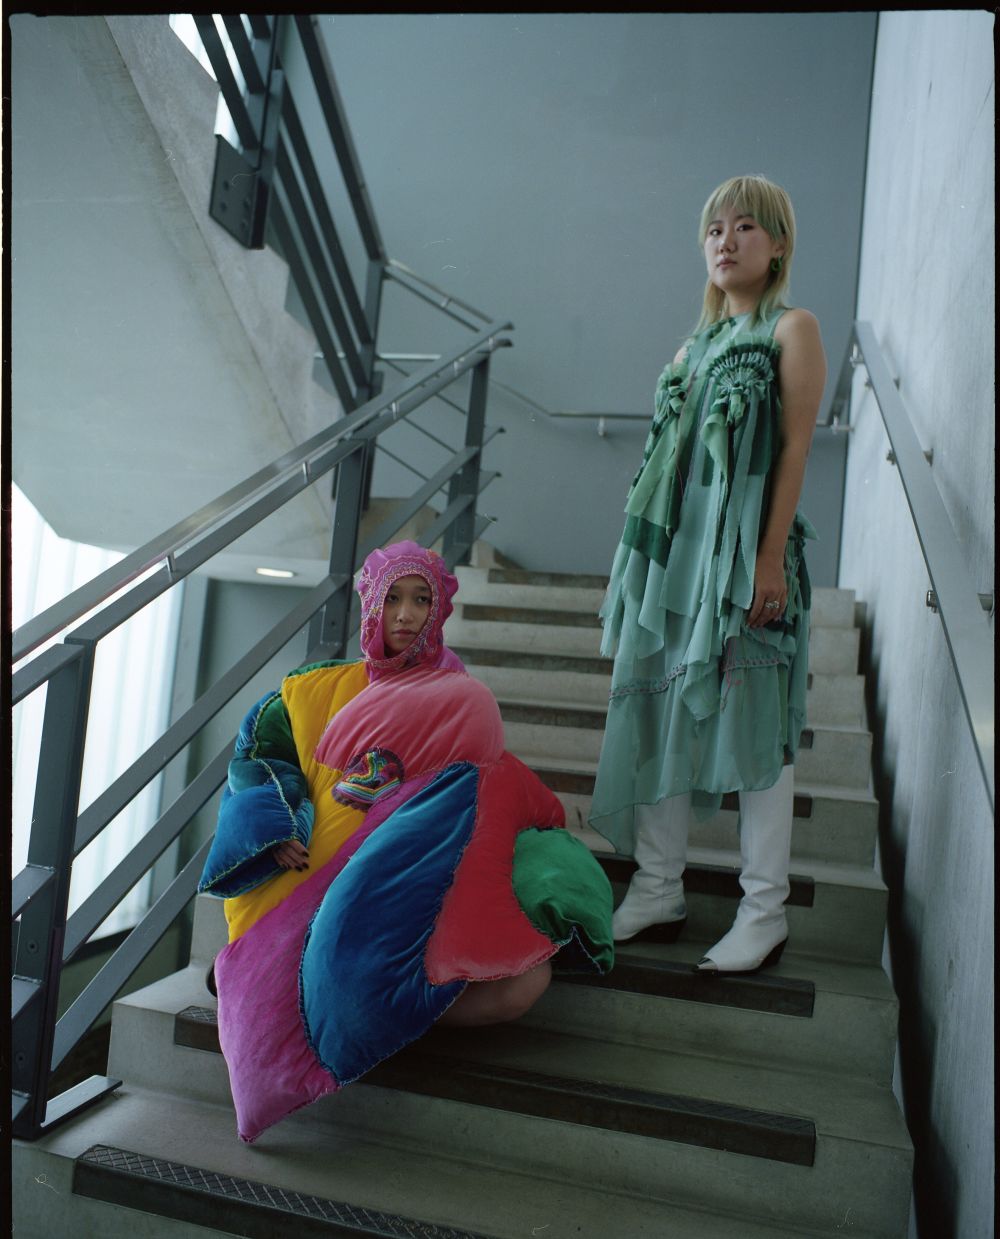 Two models in Emily's fashion designs. They are colourful, long dresses.